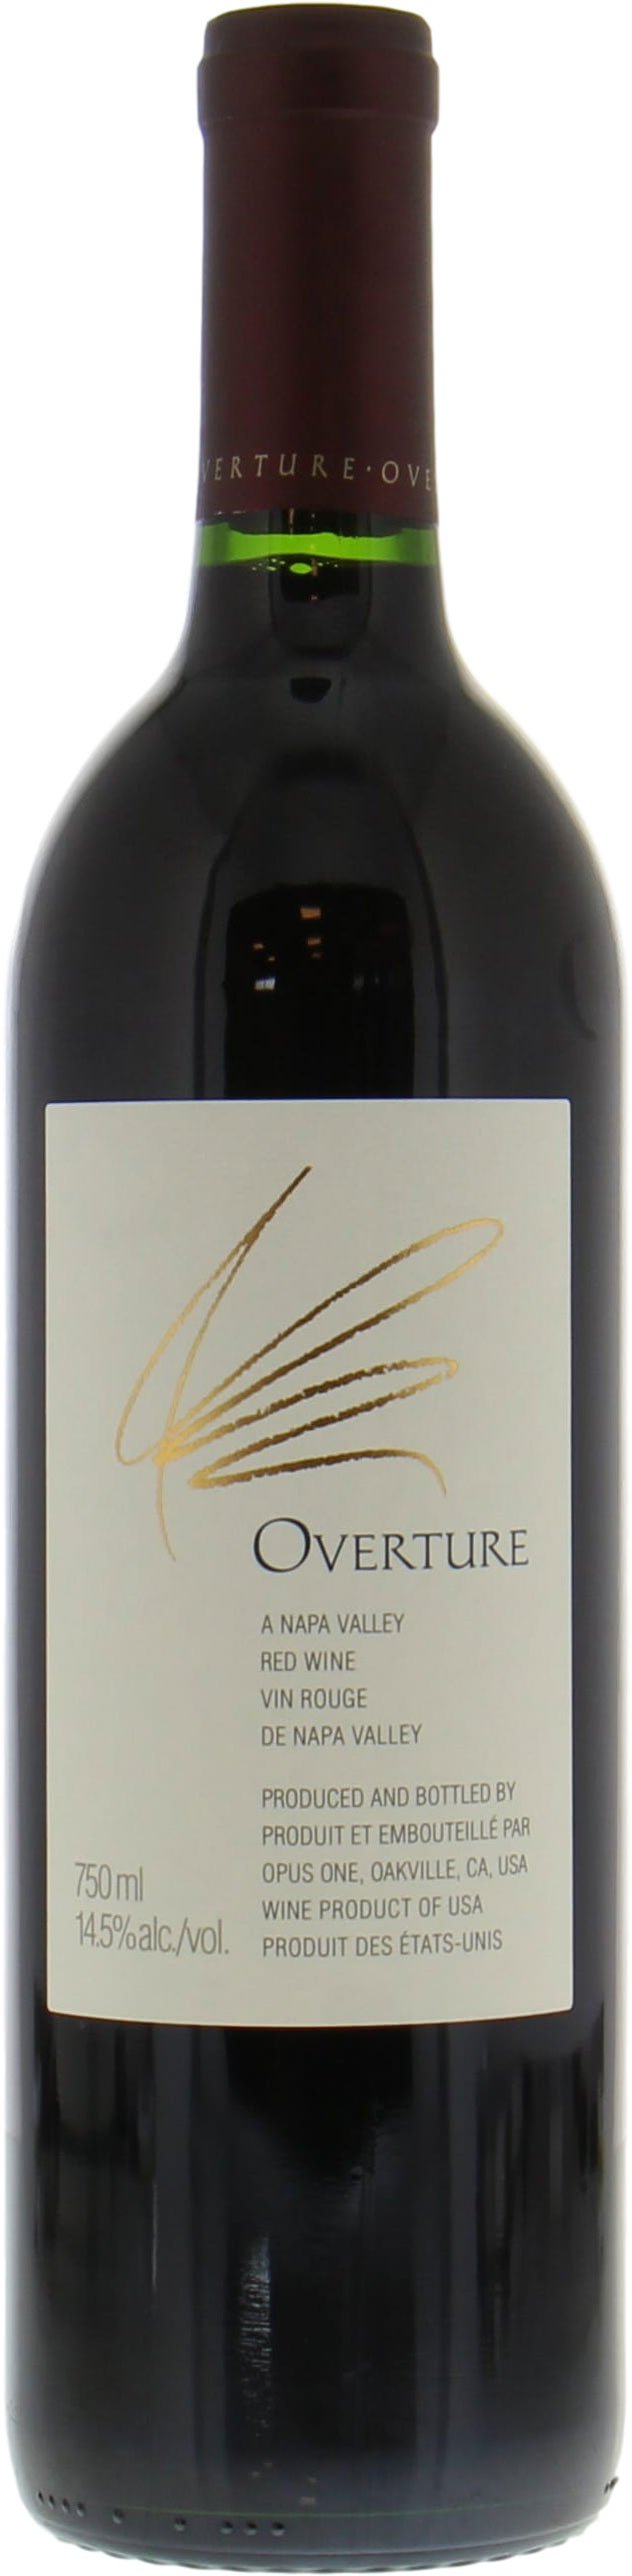 Opus One - Overture 2015